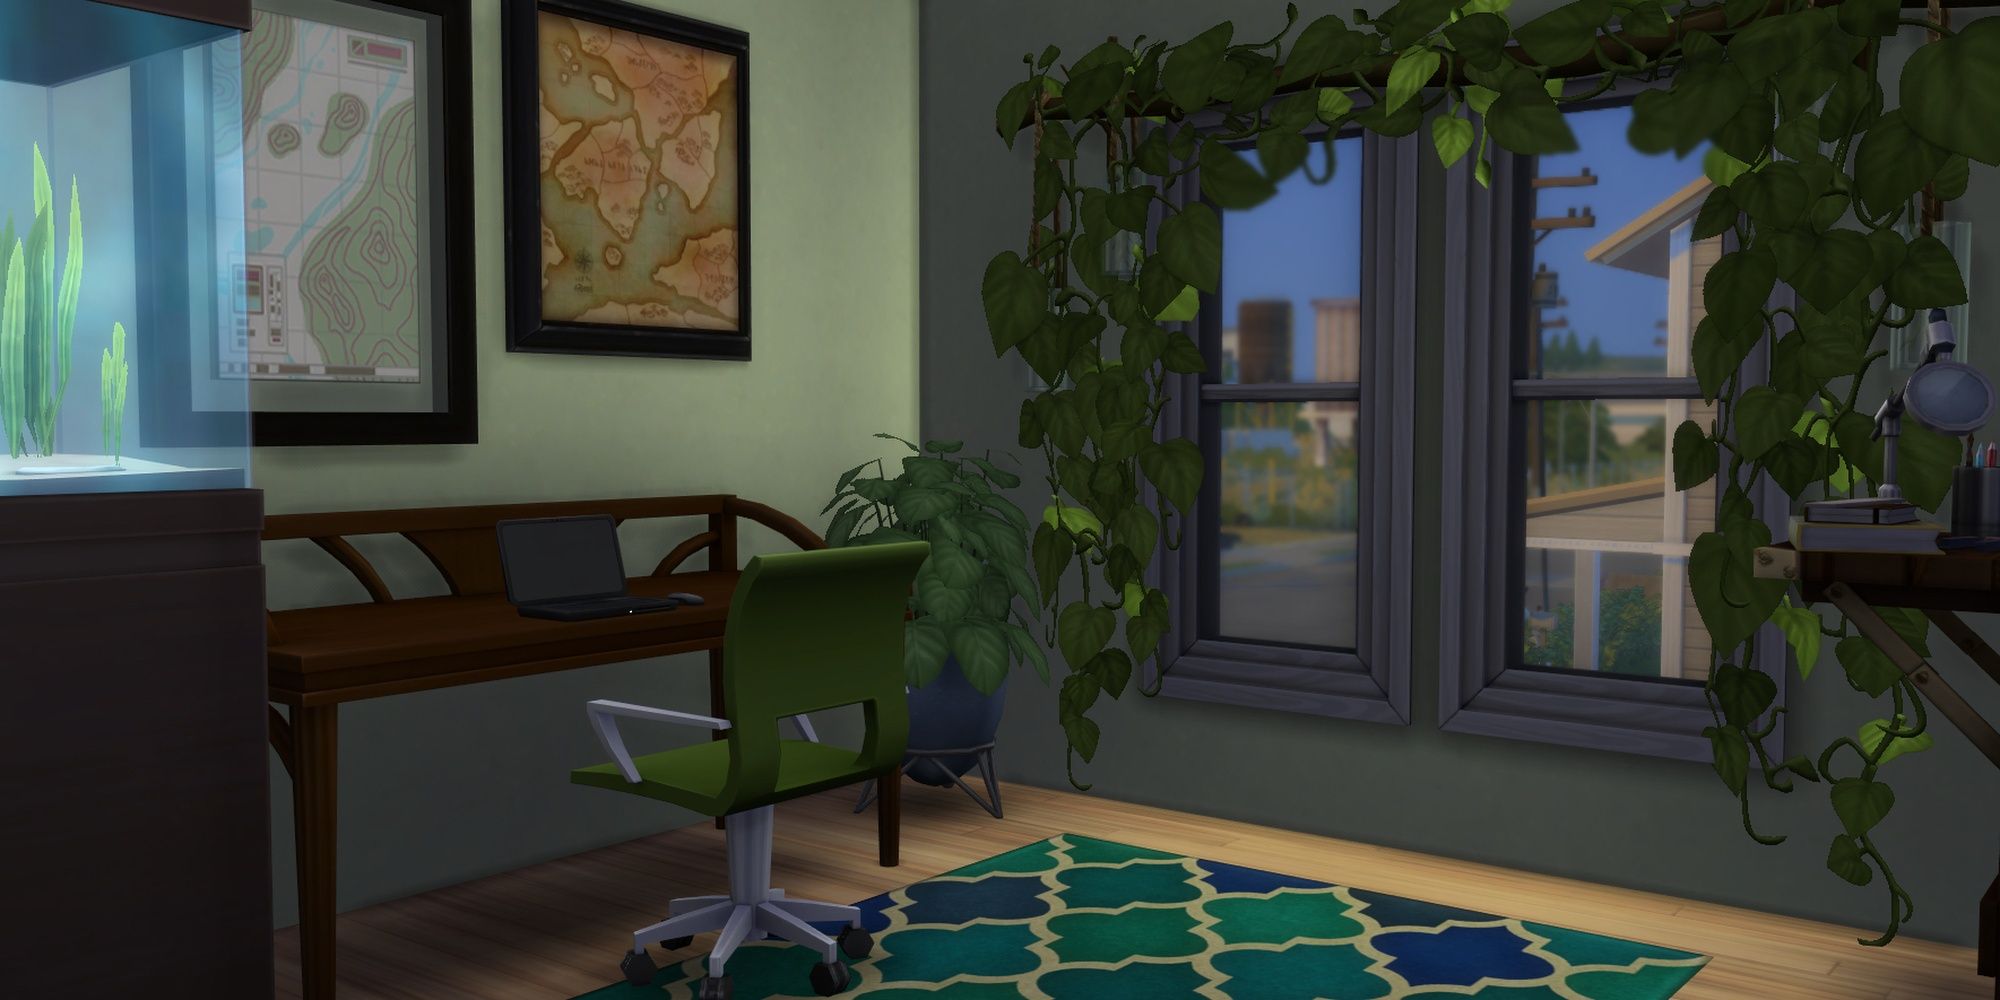 A dark wood desk holding a laptop in a green Sims 4 study filled with plants.